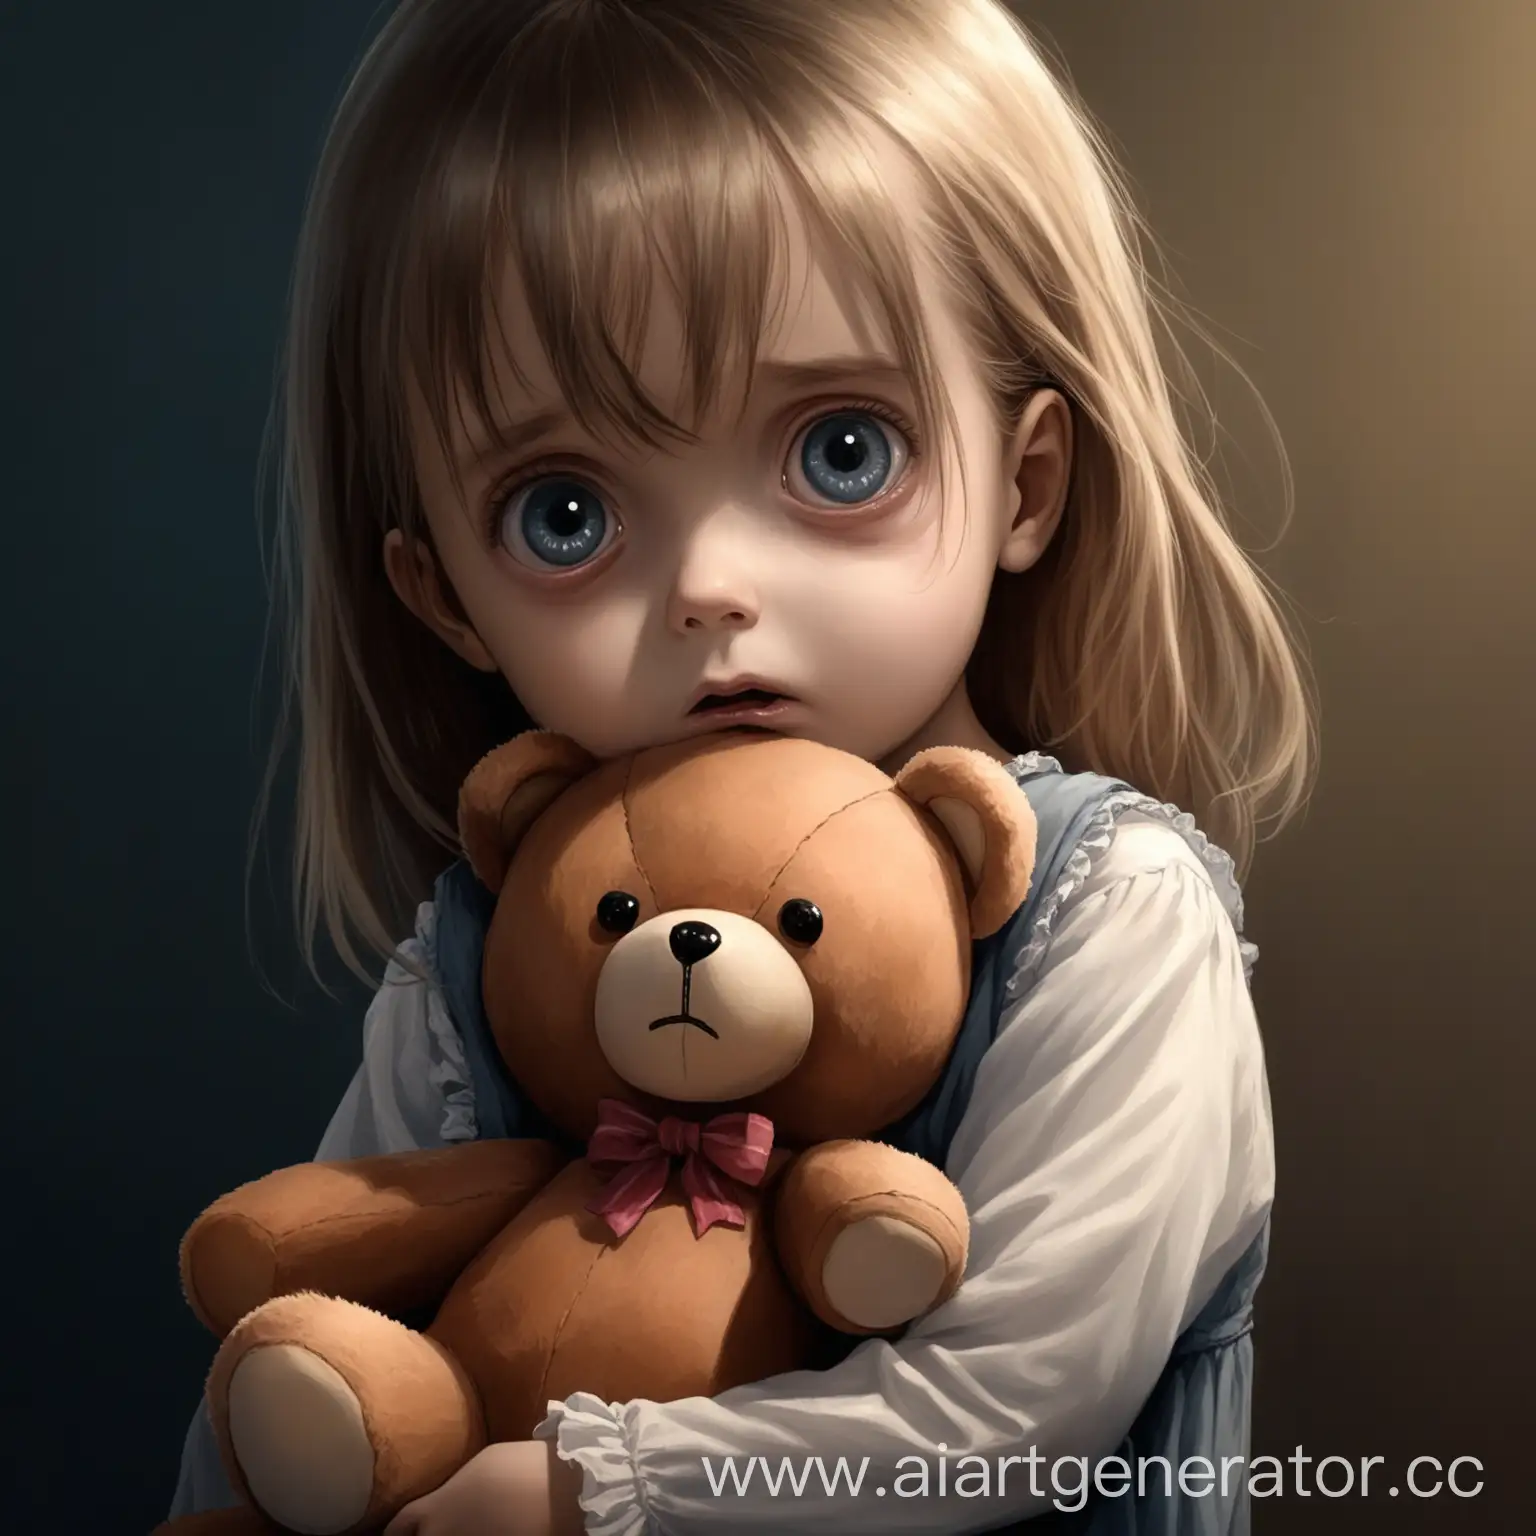 Young-Girl-Hugging-Teddy-Bear-with-a-Slightly-Scared-Expression